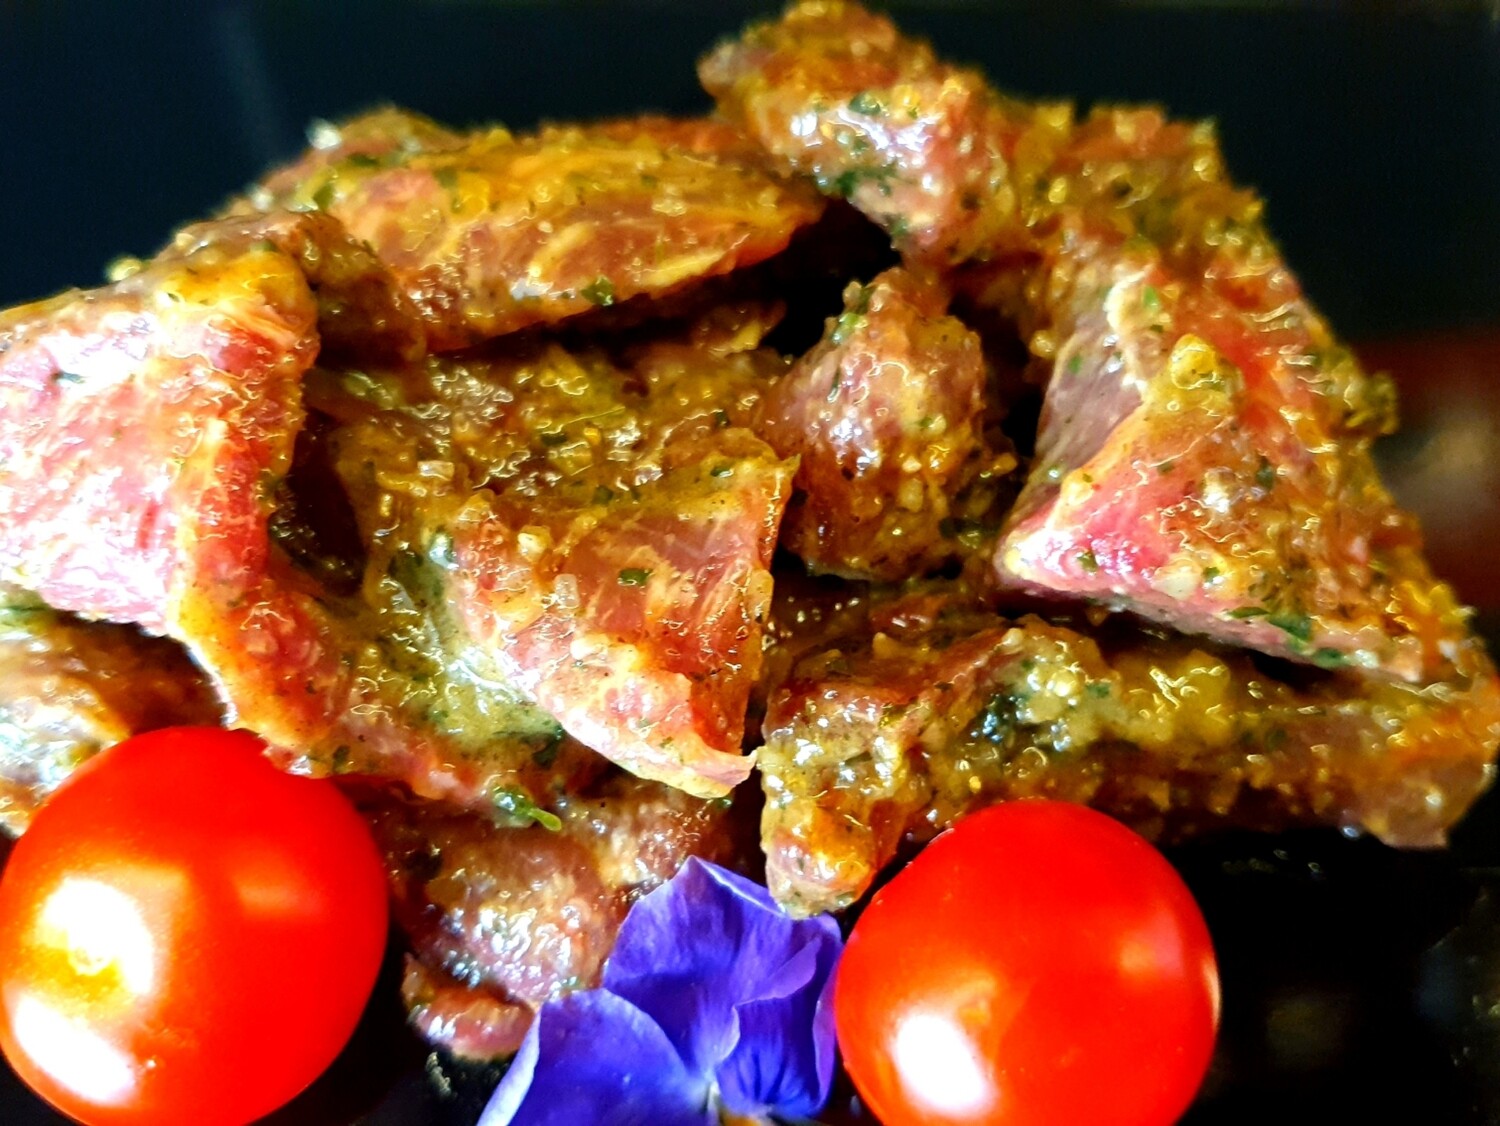 Sliced horse with garlic (Europe)